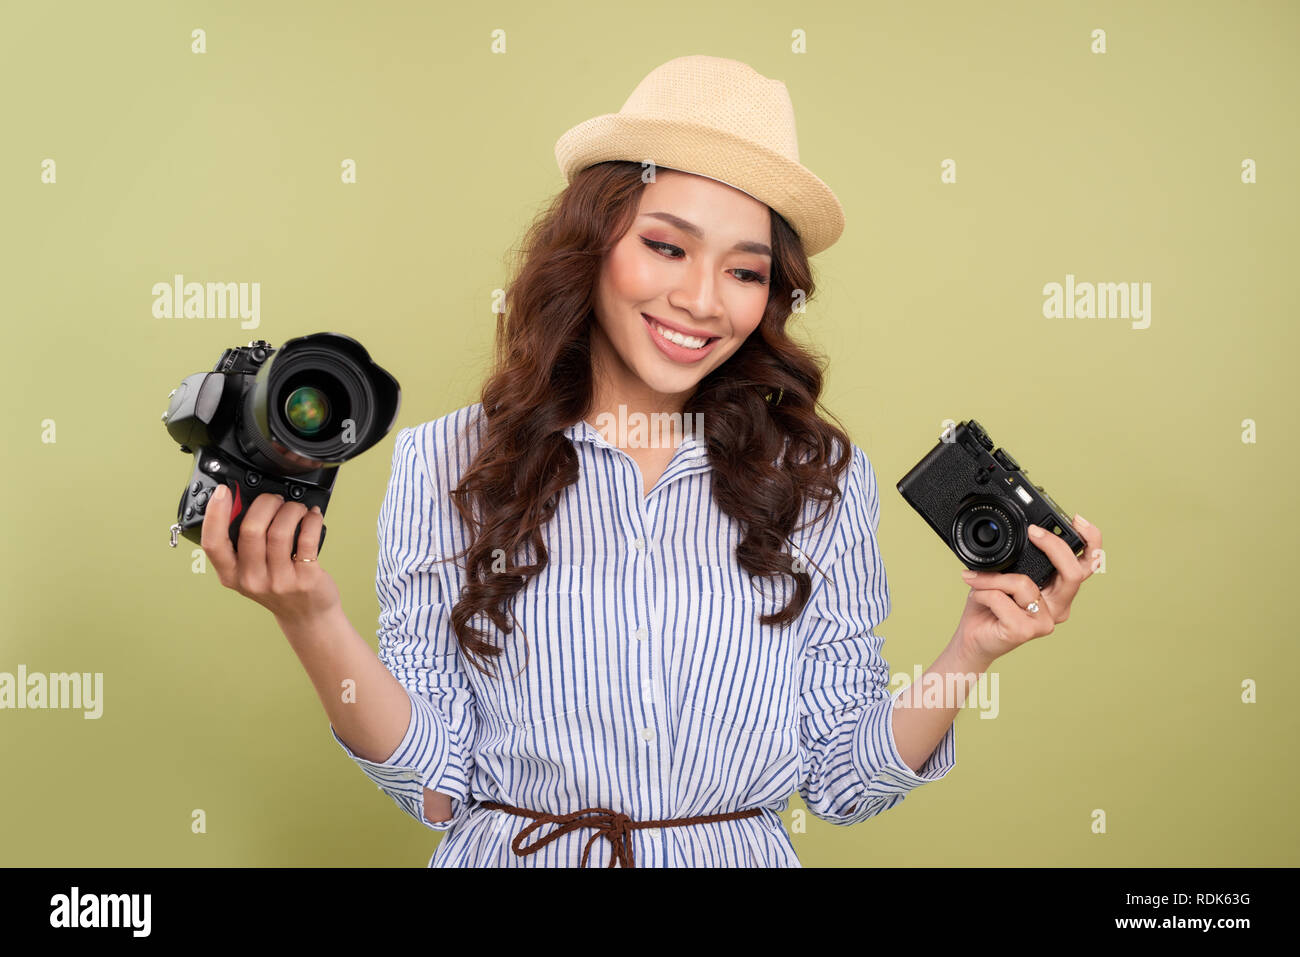 Young woman comparing professional and compact cameras on a solid background Stock Photo